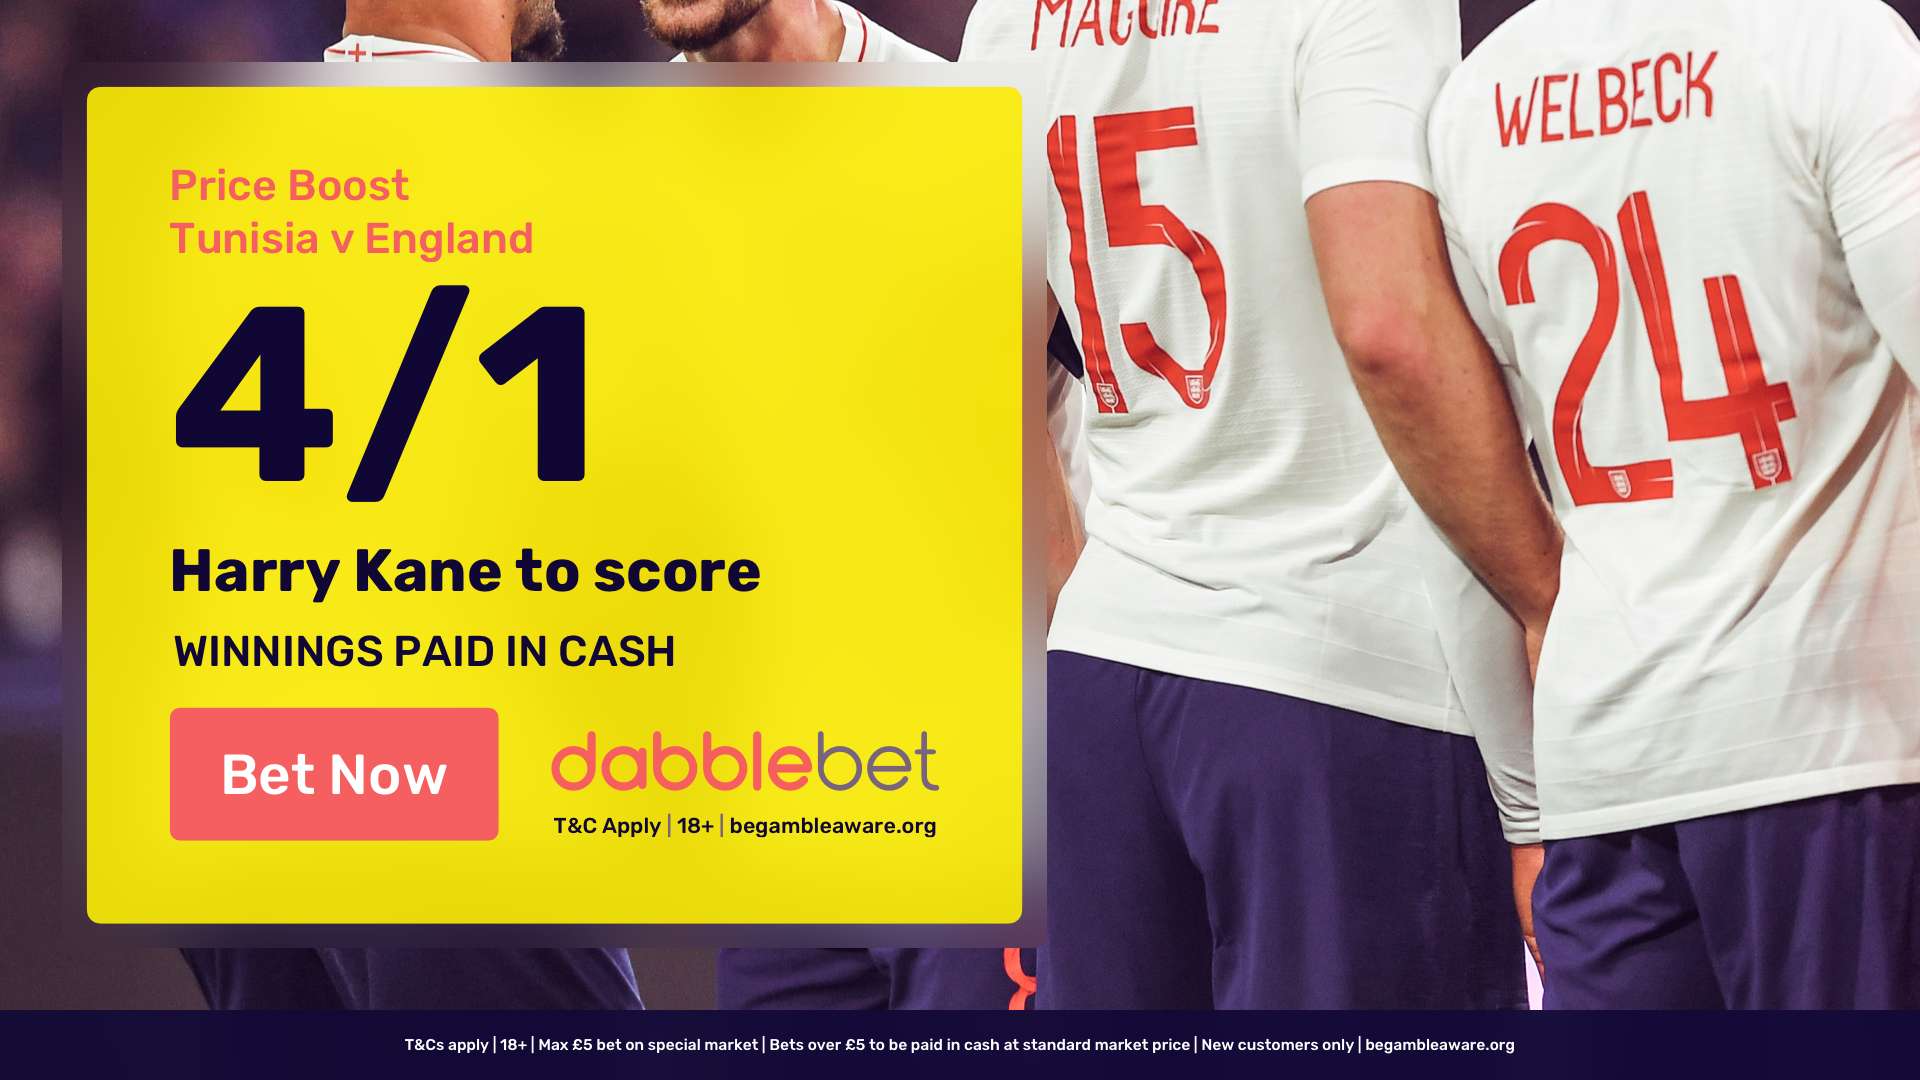 dabblebet Kane England Tunisia offer in article